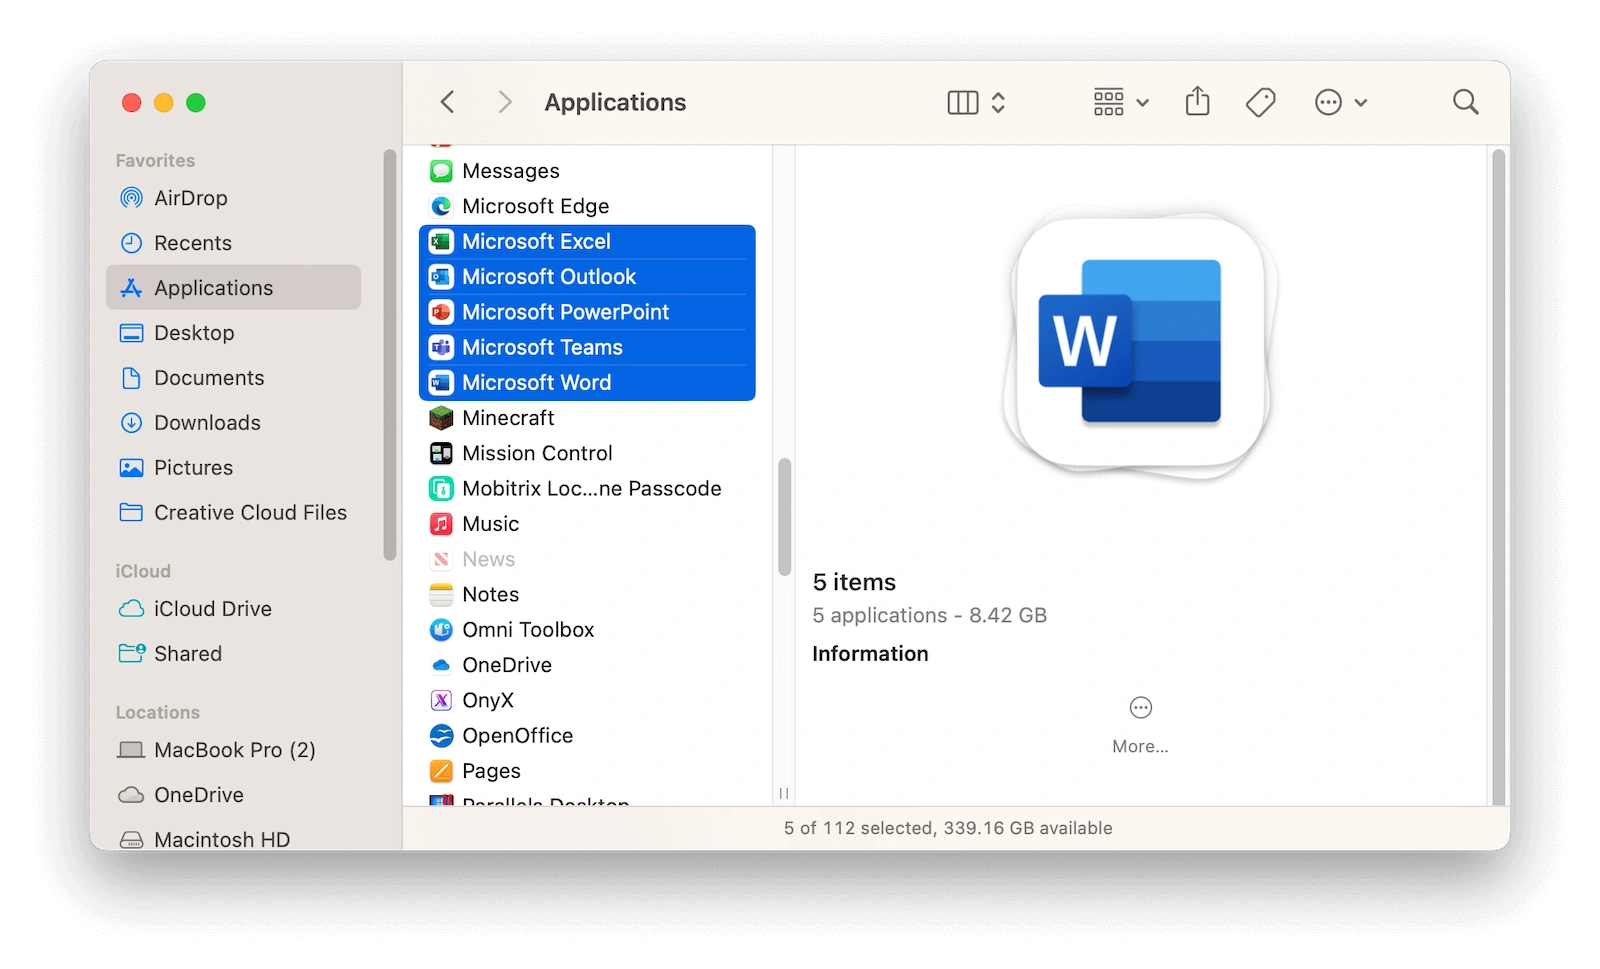 Manually Uninstall Microsoft Office Apps on Mac with Finder